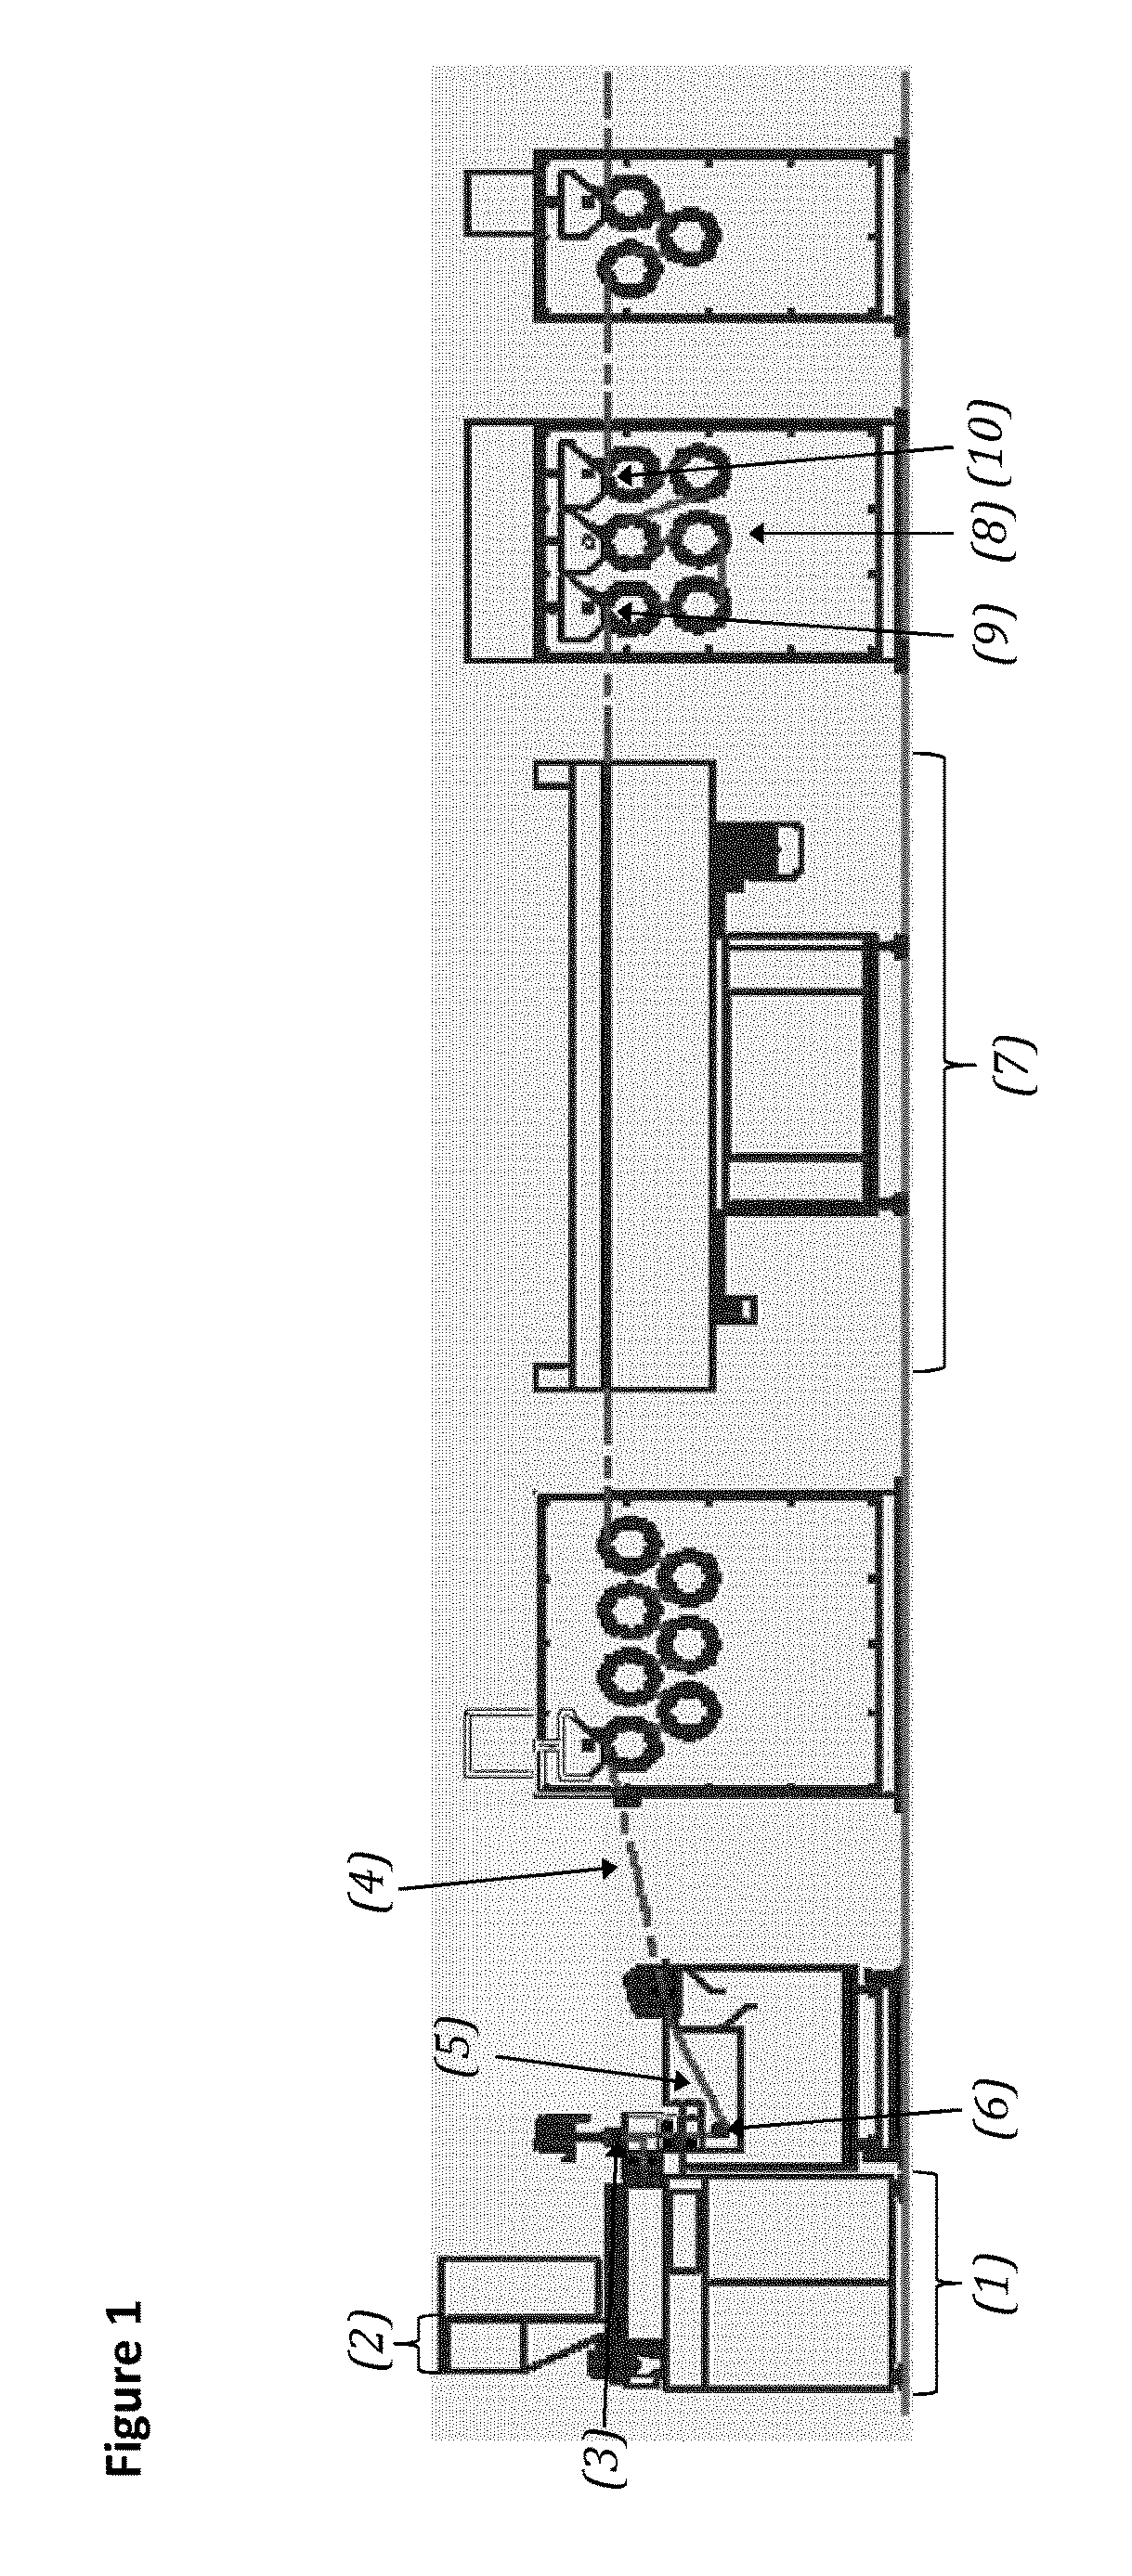 Improved polypropylene fibers, methods for producing the same and uses thereof for the production of fiber cement products